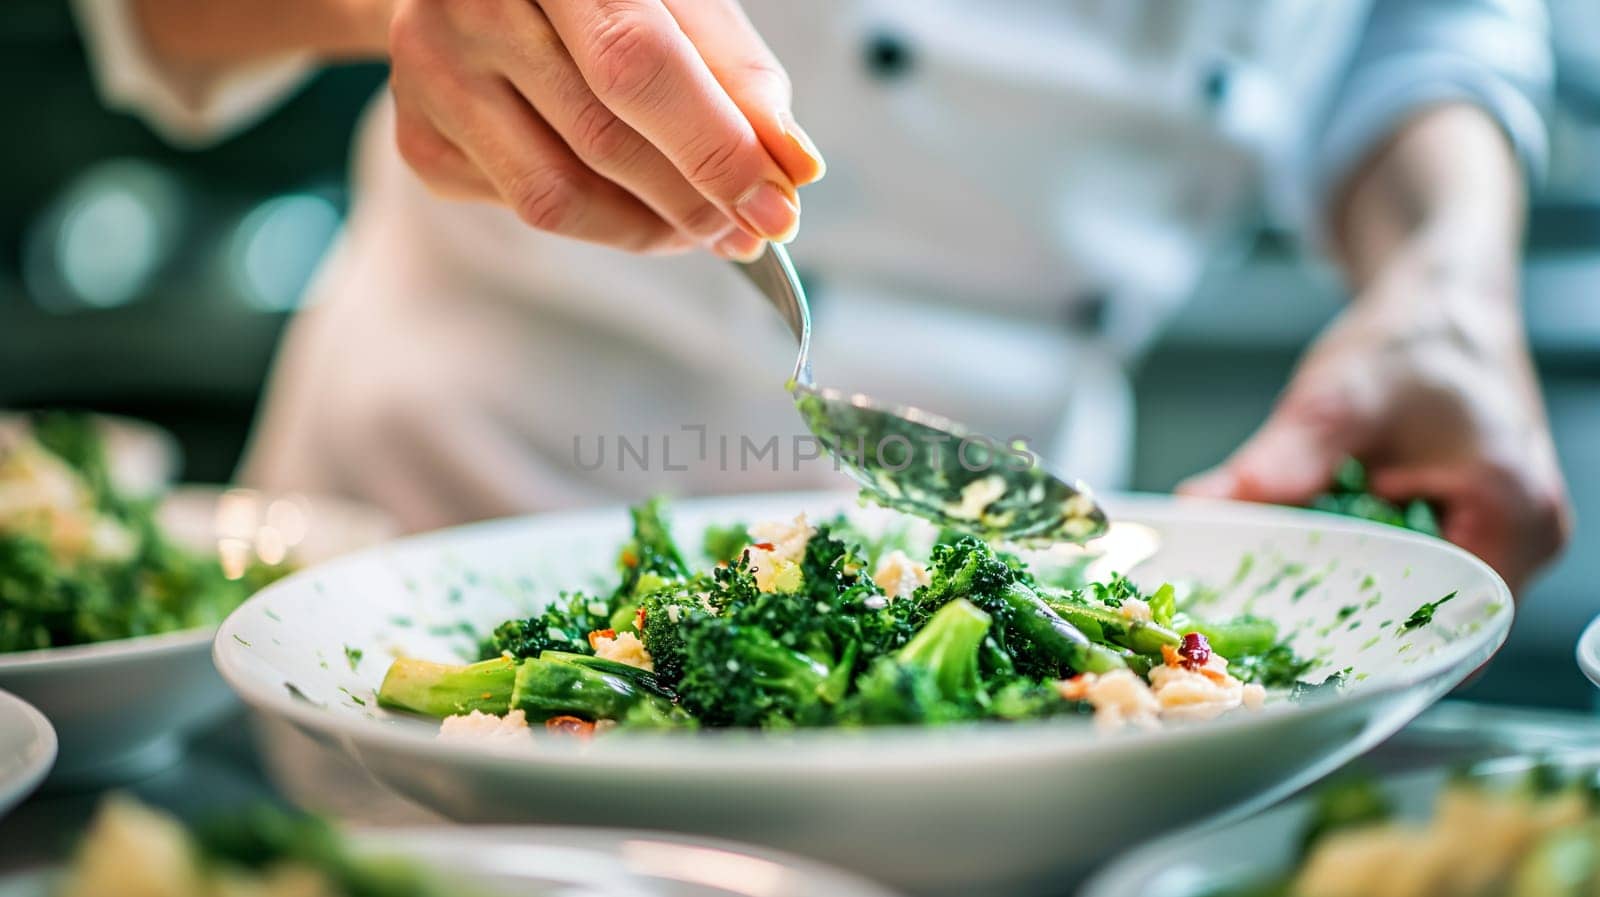 Chef Garnishing a Green Salad With Sauce in a Professional Kitchen by chrisroll